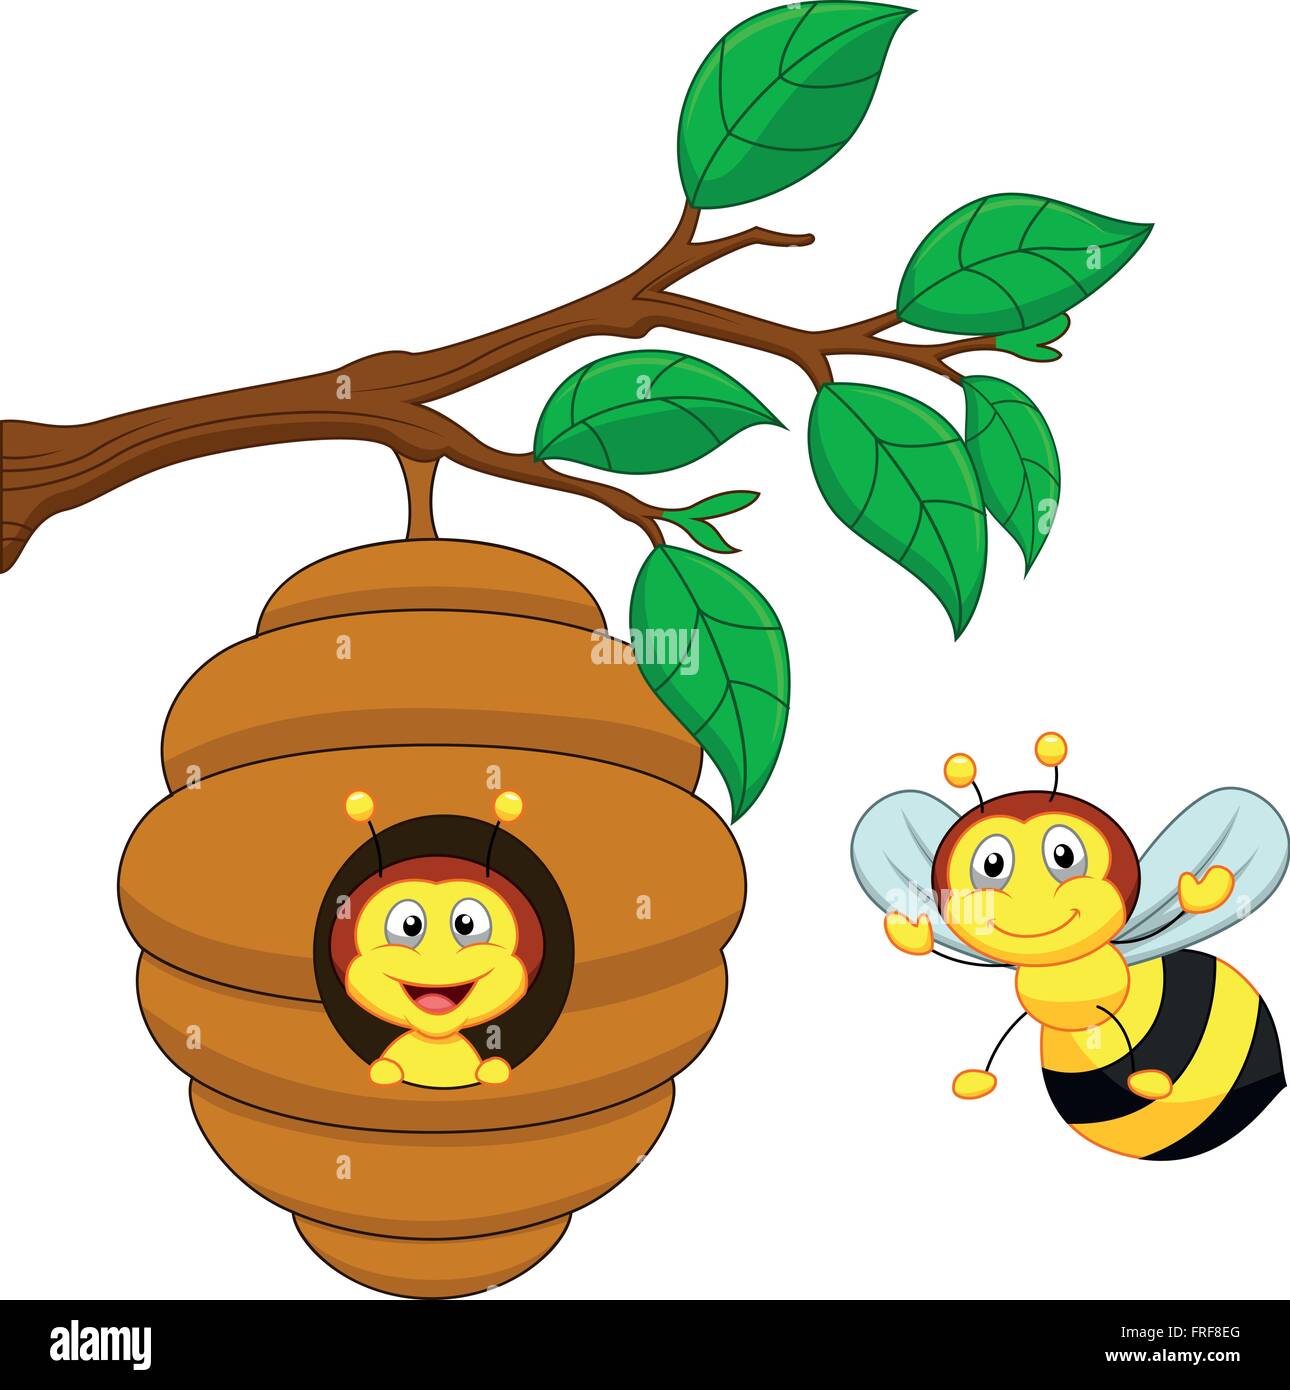 Illustration of a honey bee and comb Stock Vector